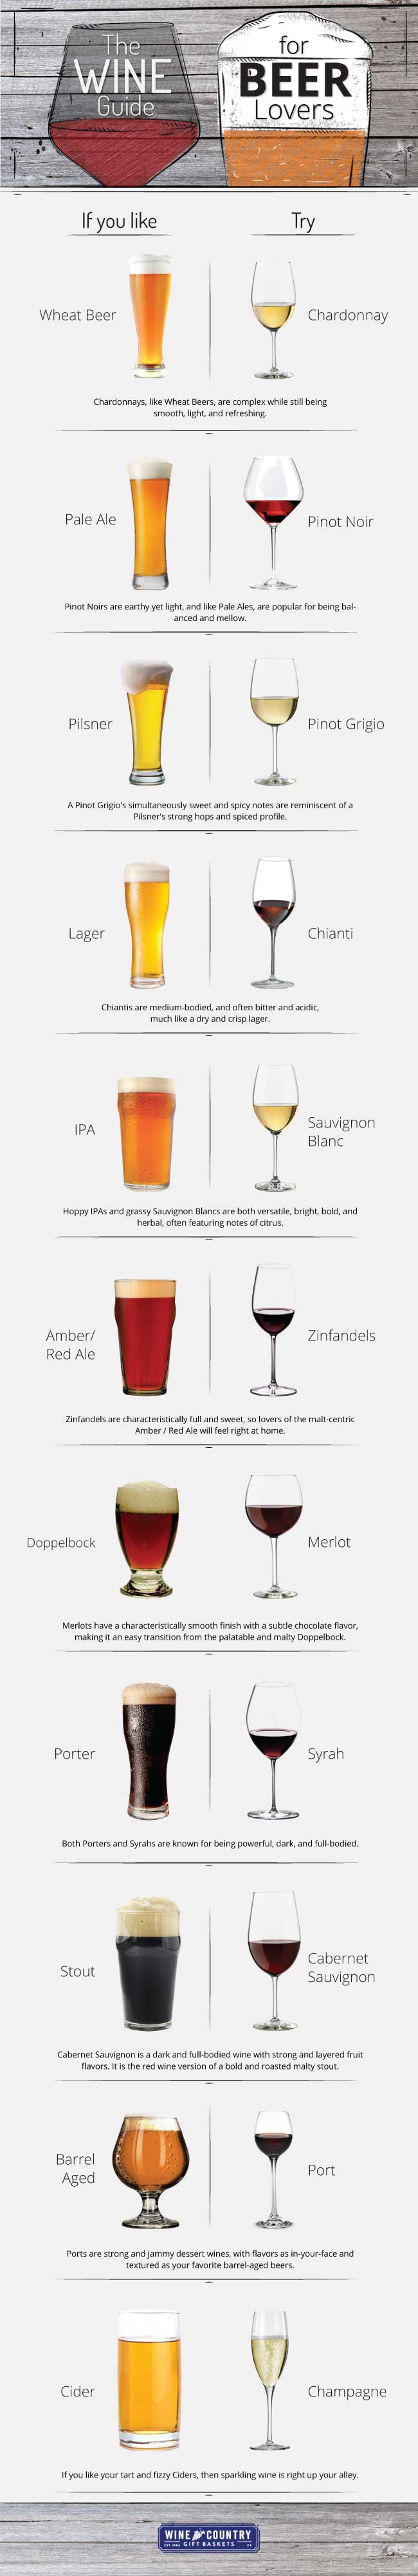 The Wine Guide for Beer Lovers